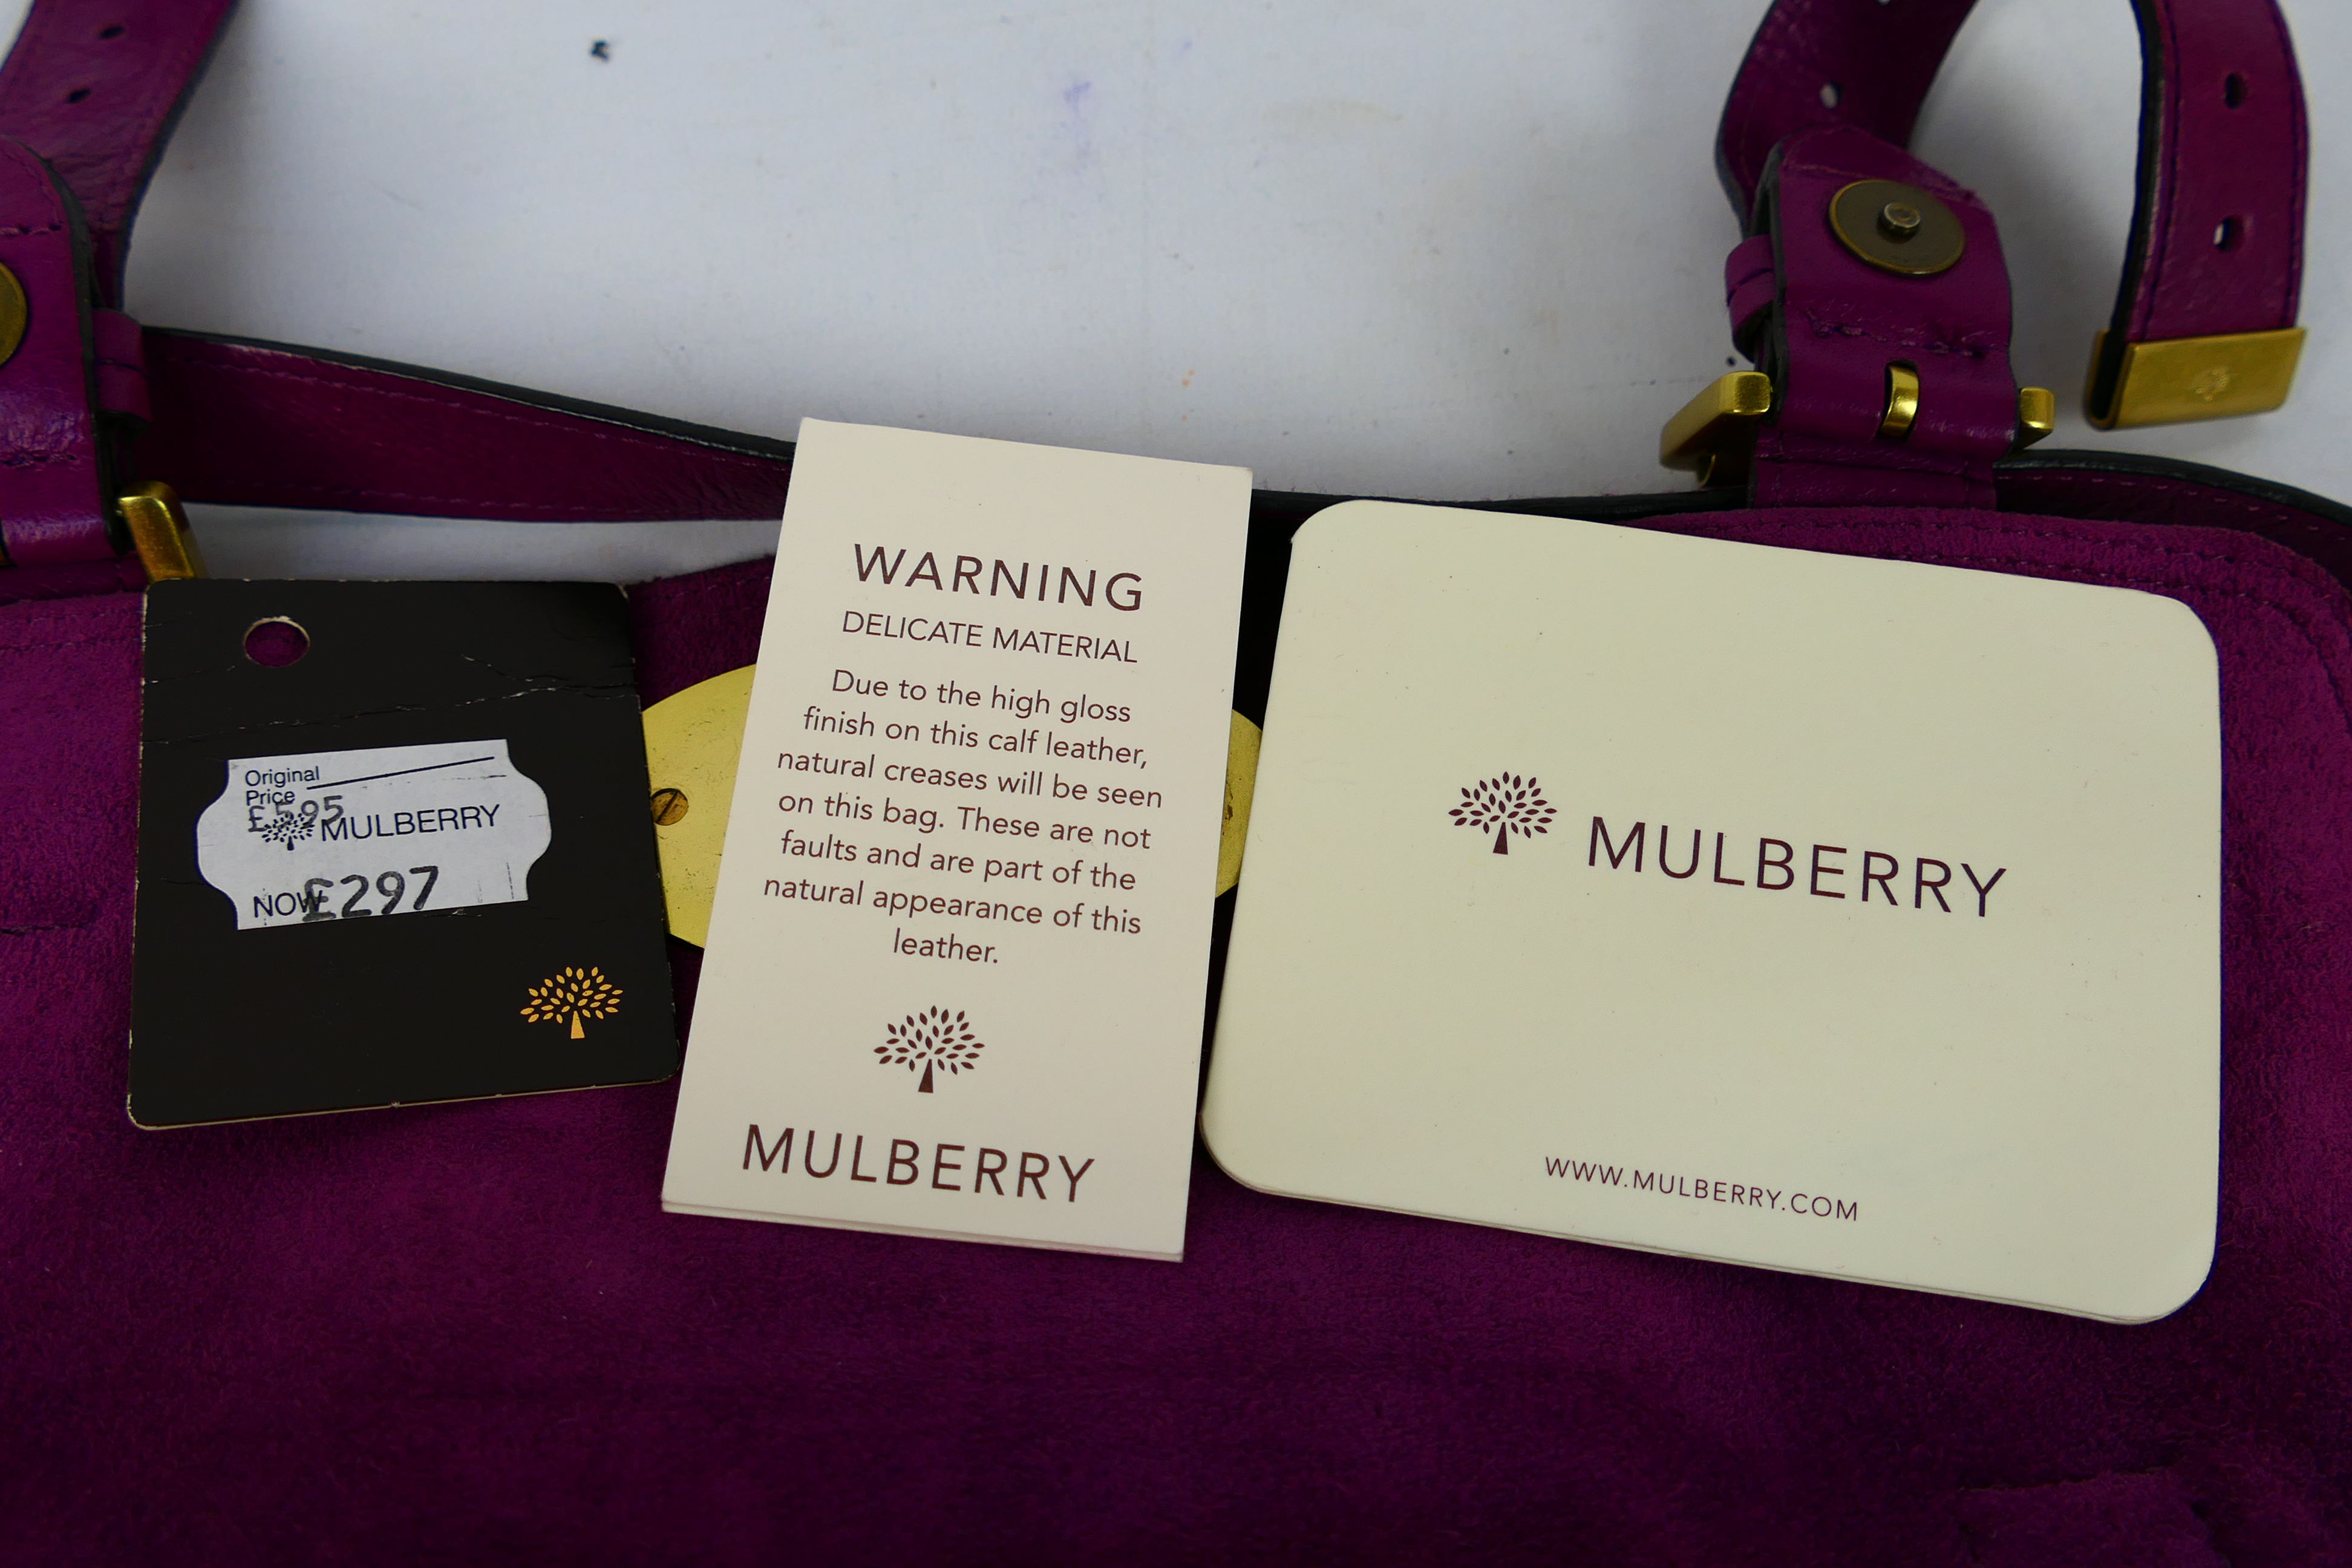 Mulberry - A raspberry Mulberry leather handbag - Handbag has one interior zip pocket and one pouch. - Image 9 of 9